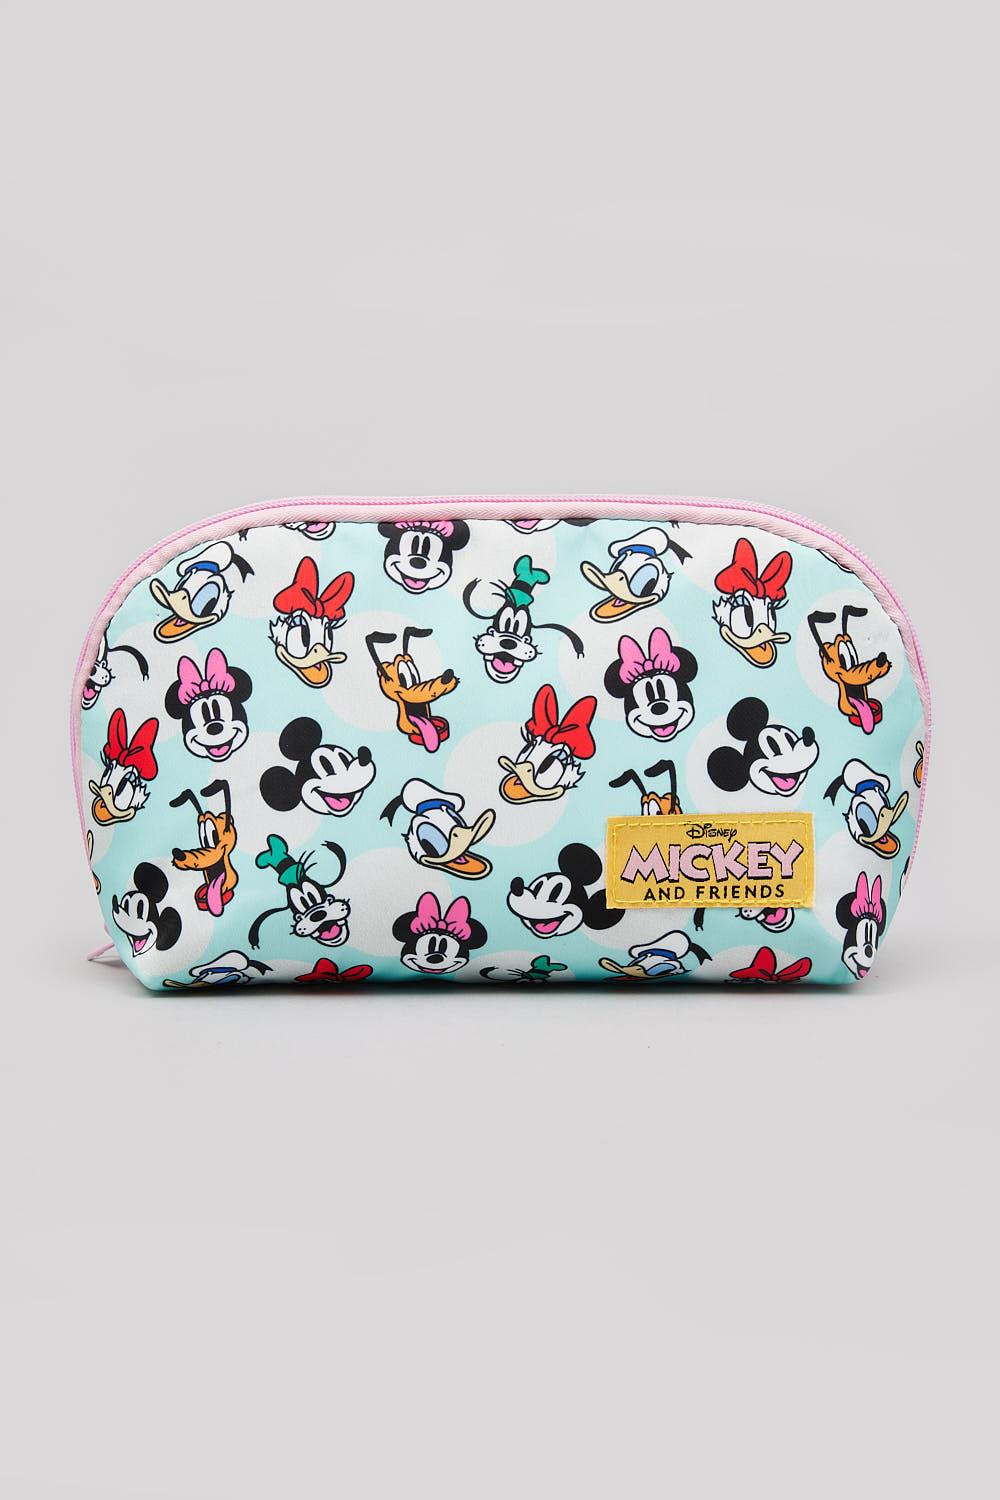 MICKEY AND FRIENDS ‘STRIKE A POSE’ TURQUOISE MAKE UP BAG